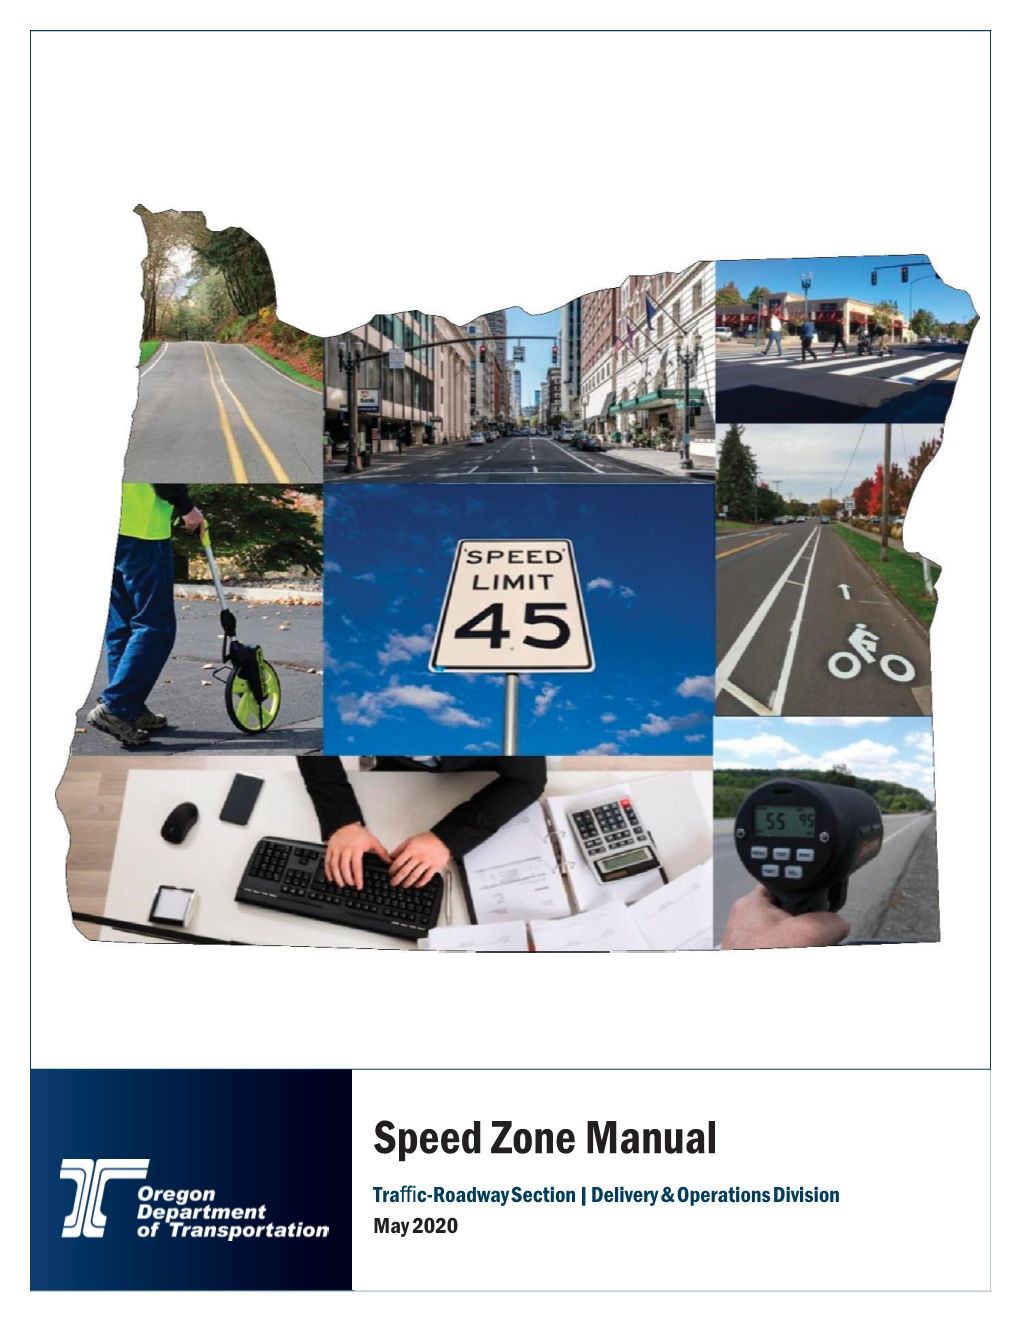 Speed Zone Manual Traﬃc-Roadway Section | Delivery & Operations Division May 2020 Traffic-Roadway Section Speed Zone Manual